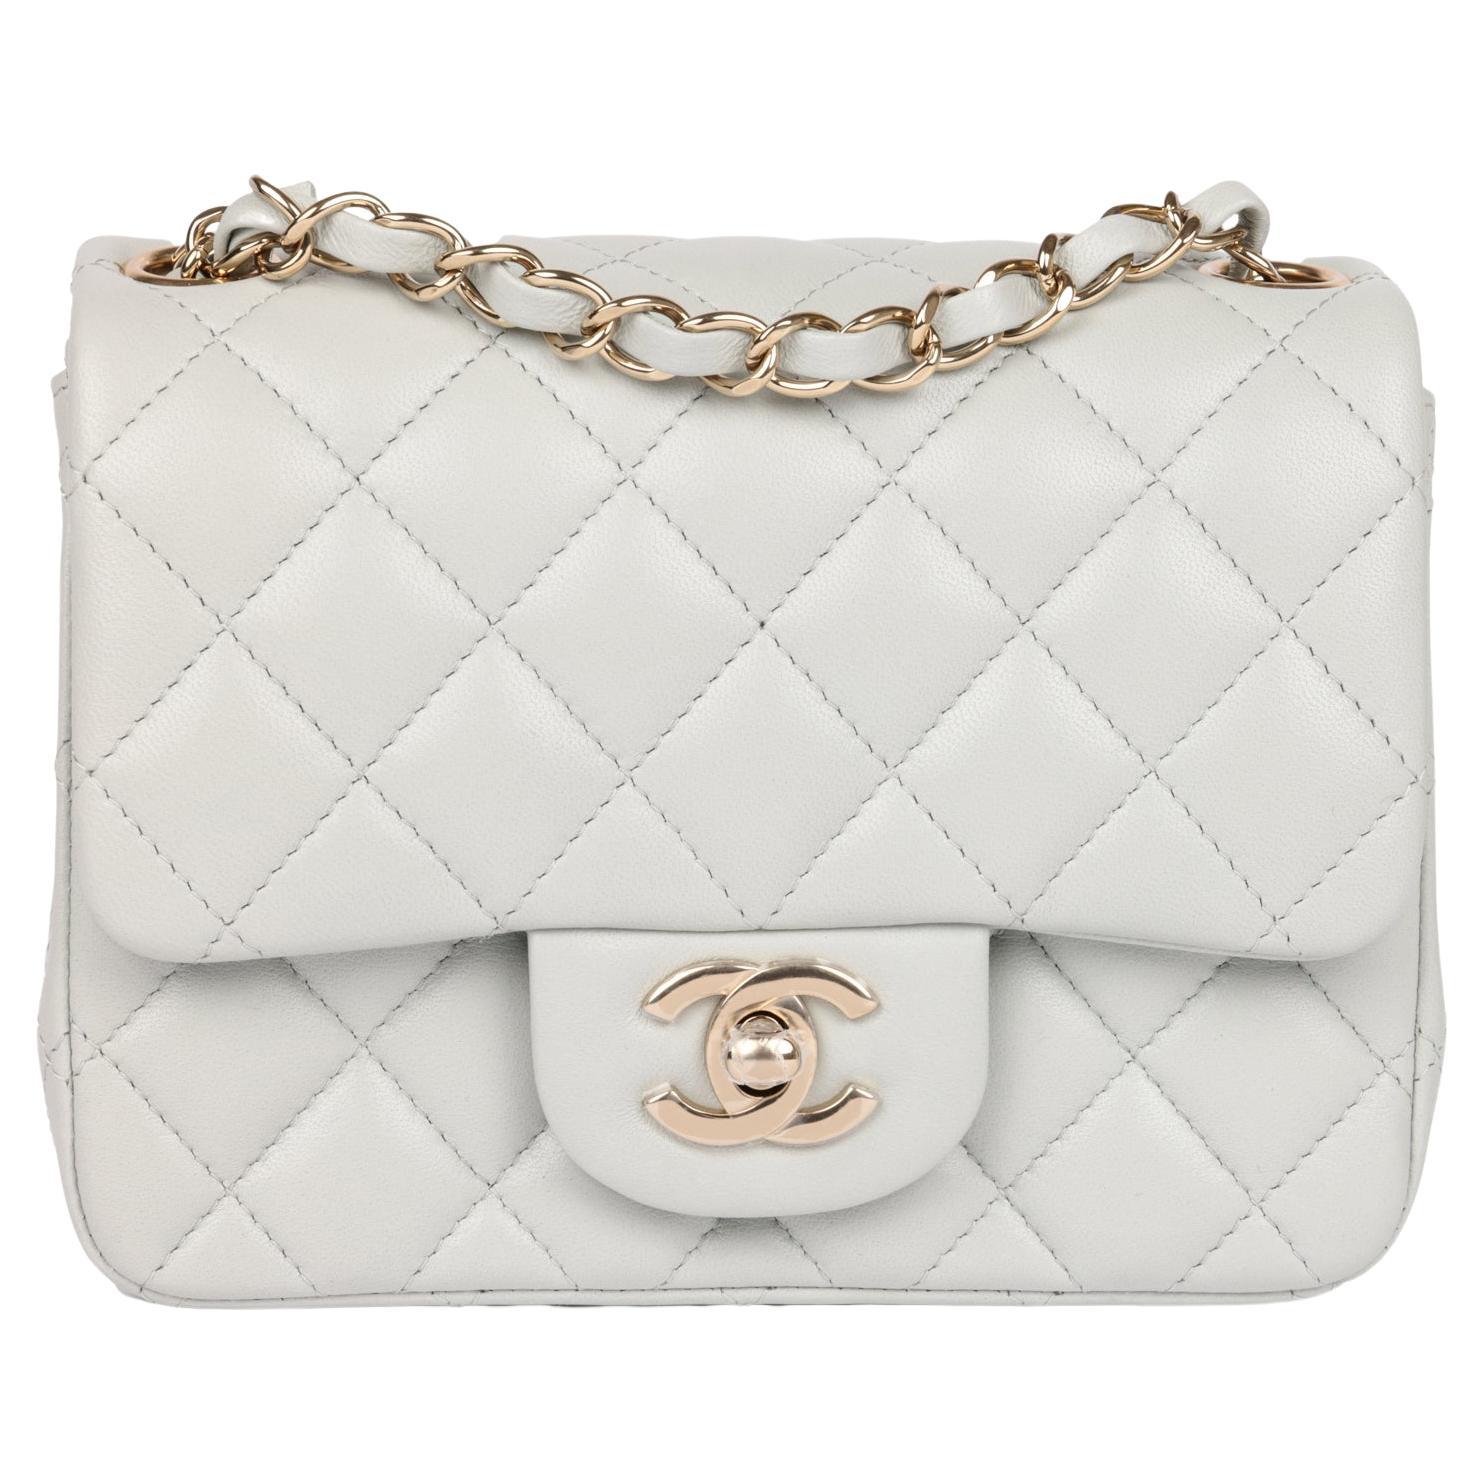 CHANEL Light Grey Quilted Lambskin Square Mini Flap Bag